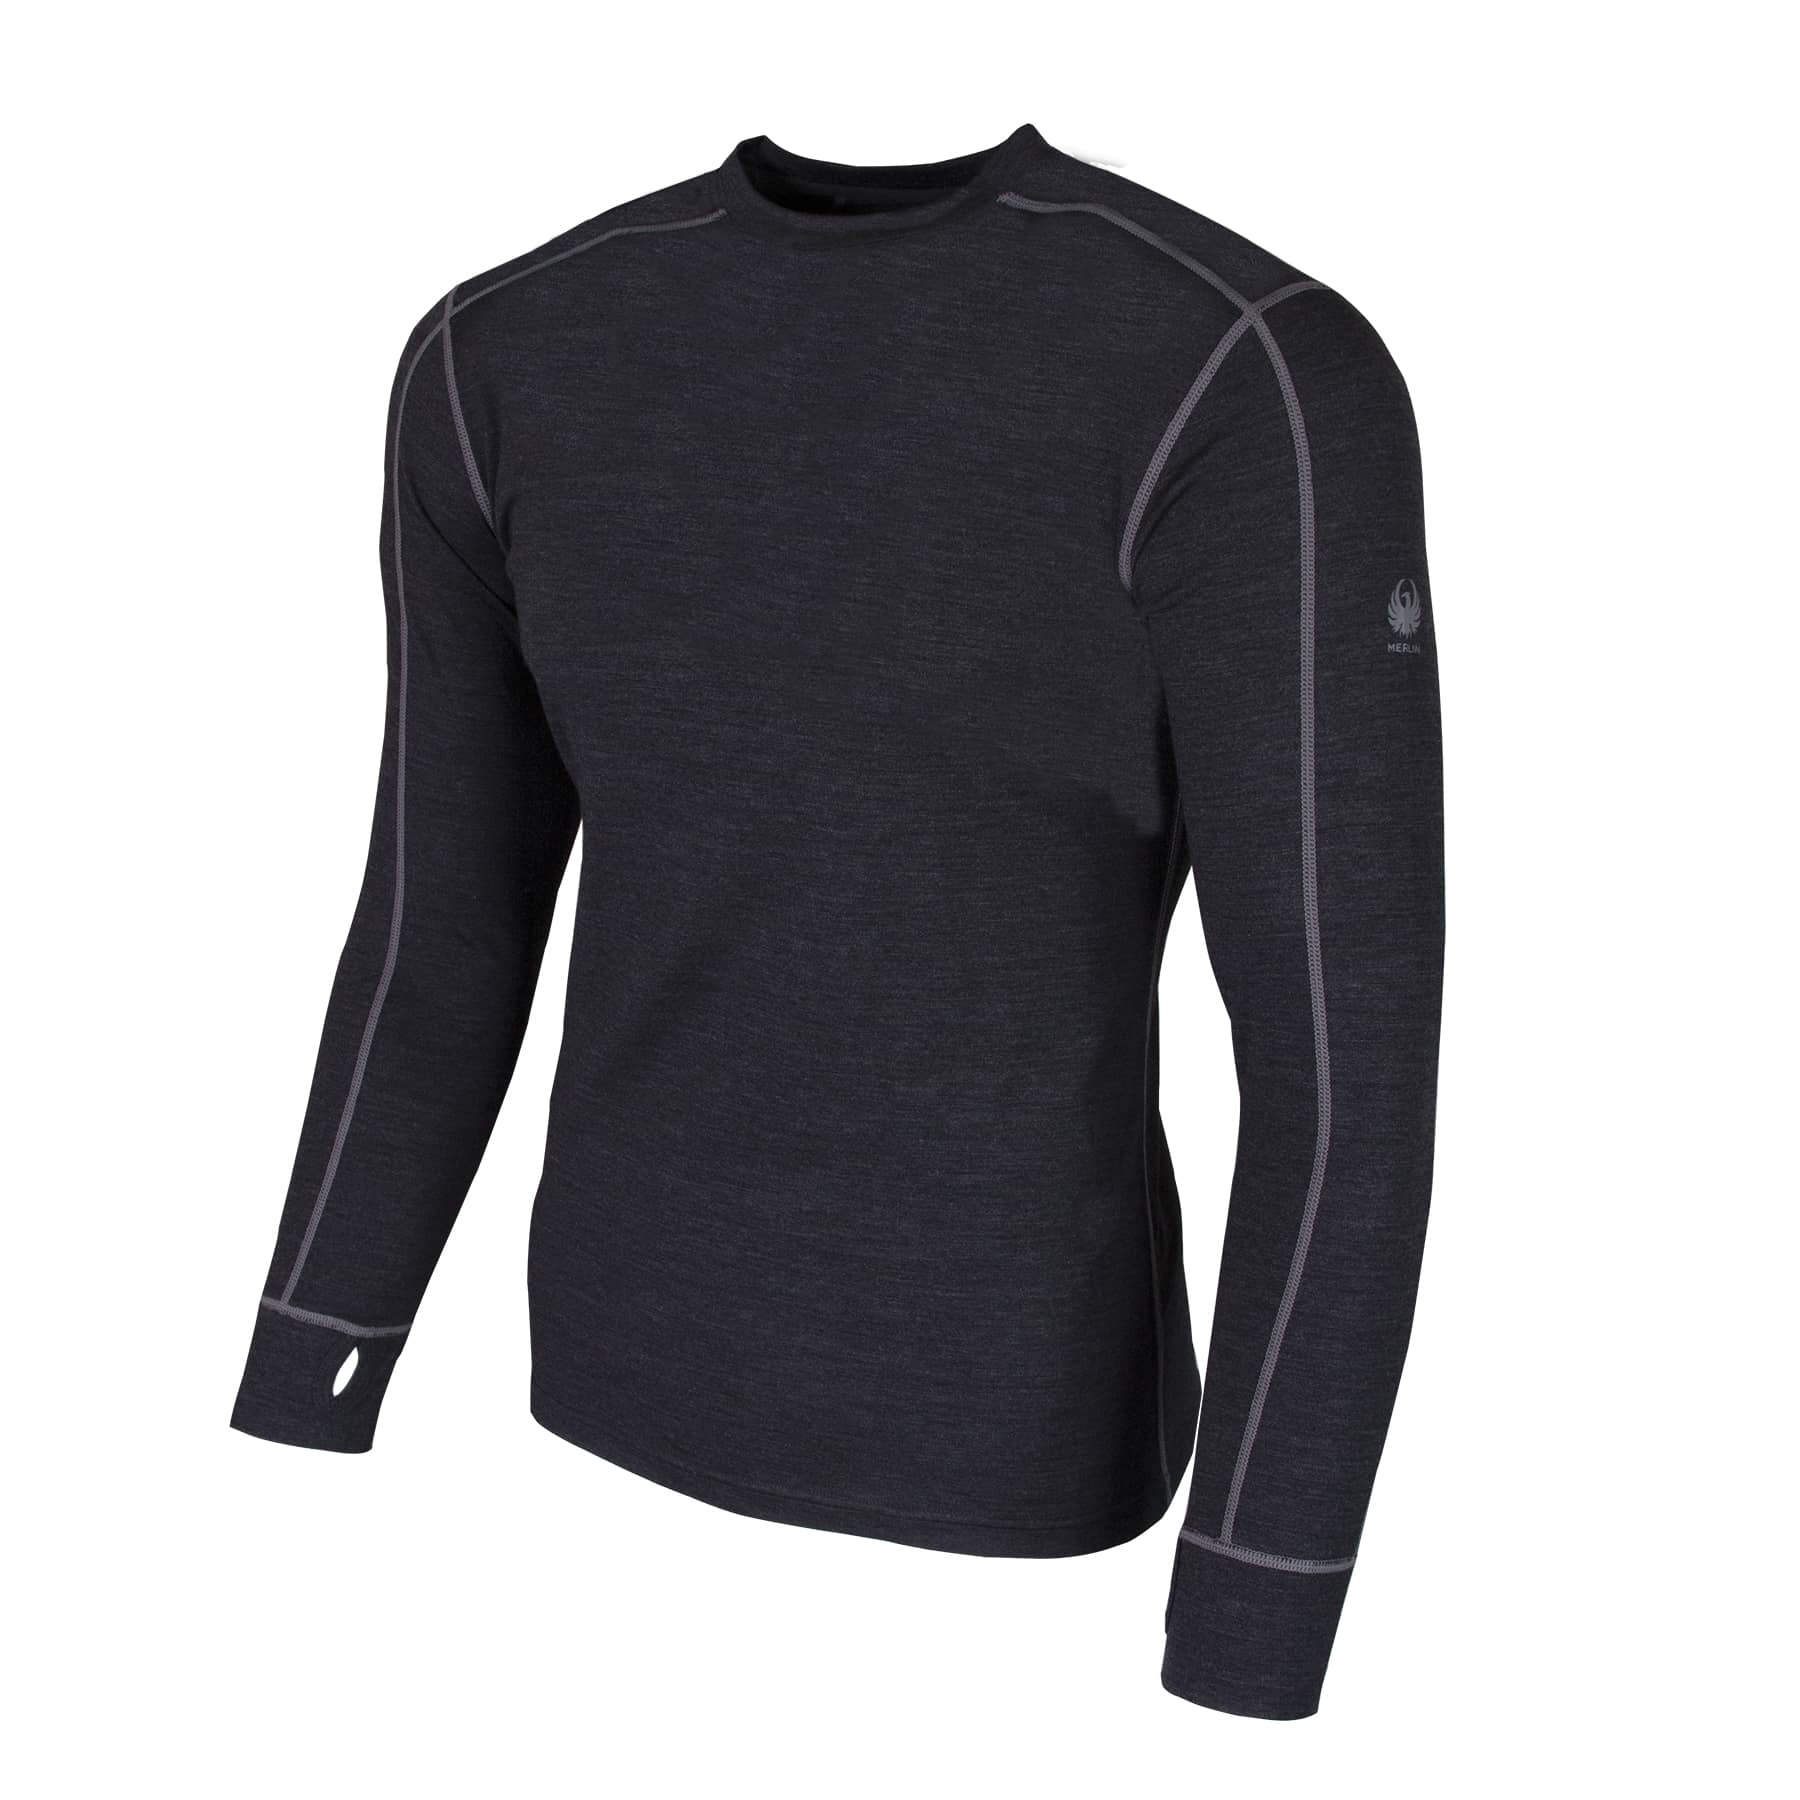 Merino Wool Long Sleeve Base Layer - Designed for cyclists